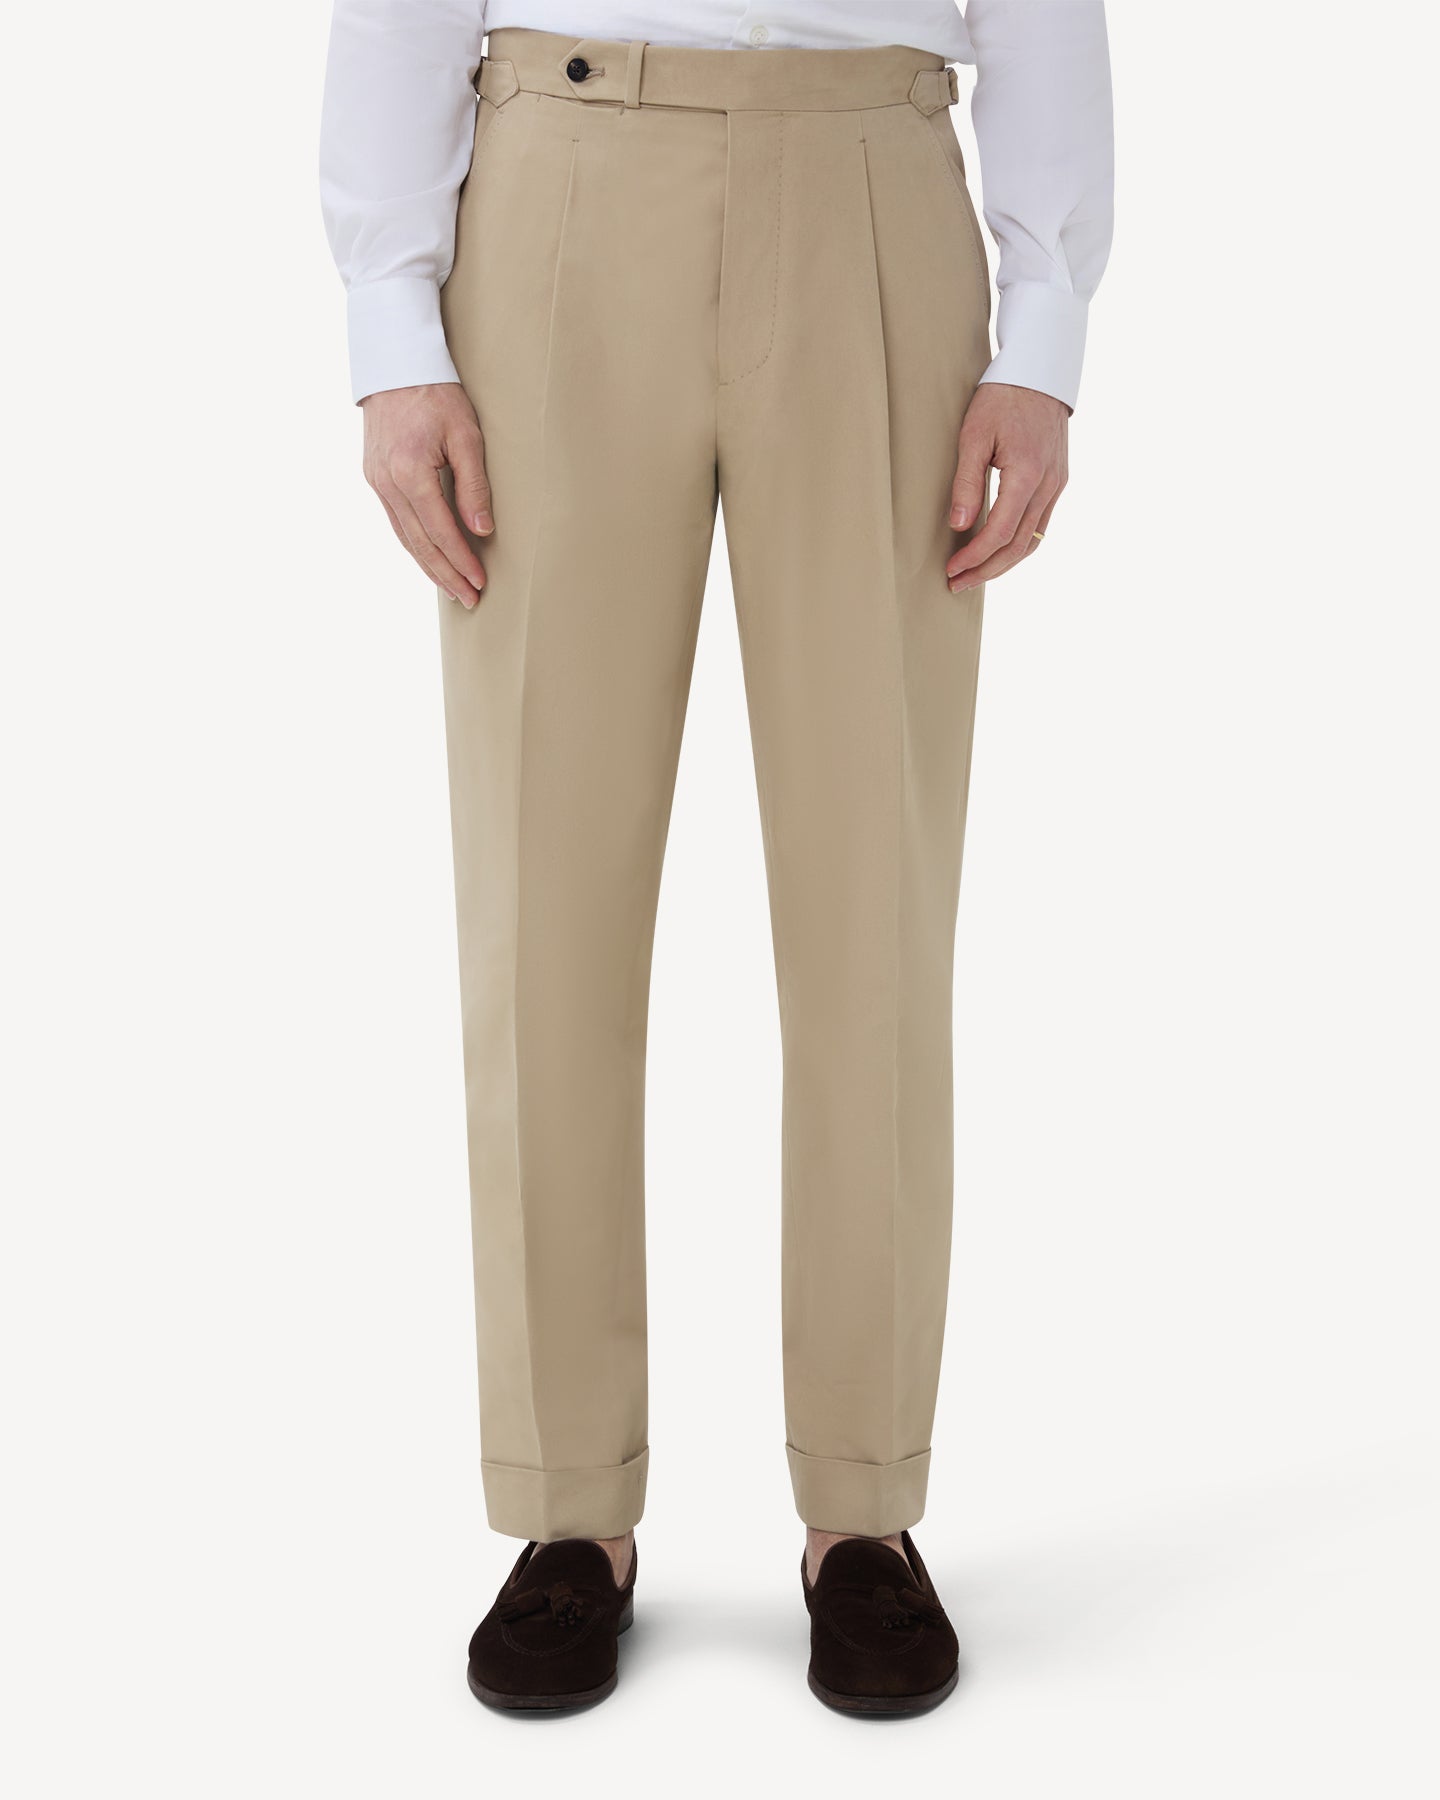 The front of stone cotton trousers with single pleats and side adjusters